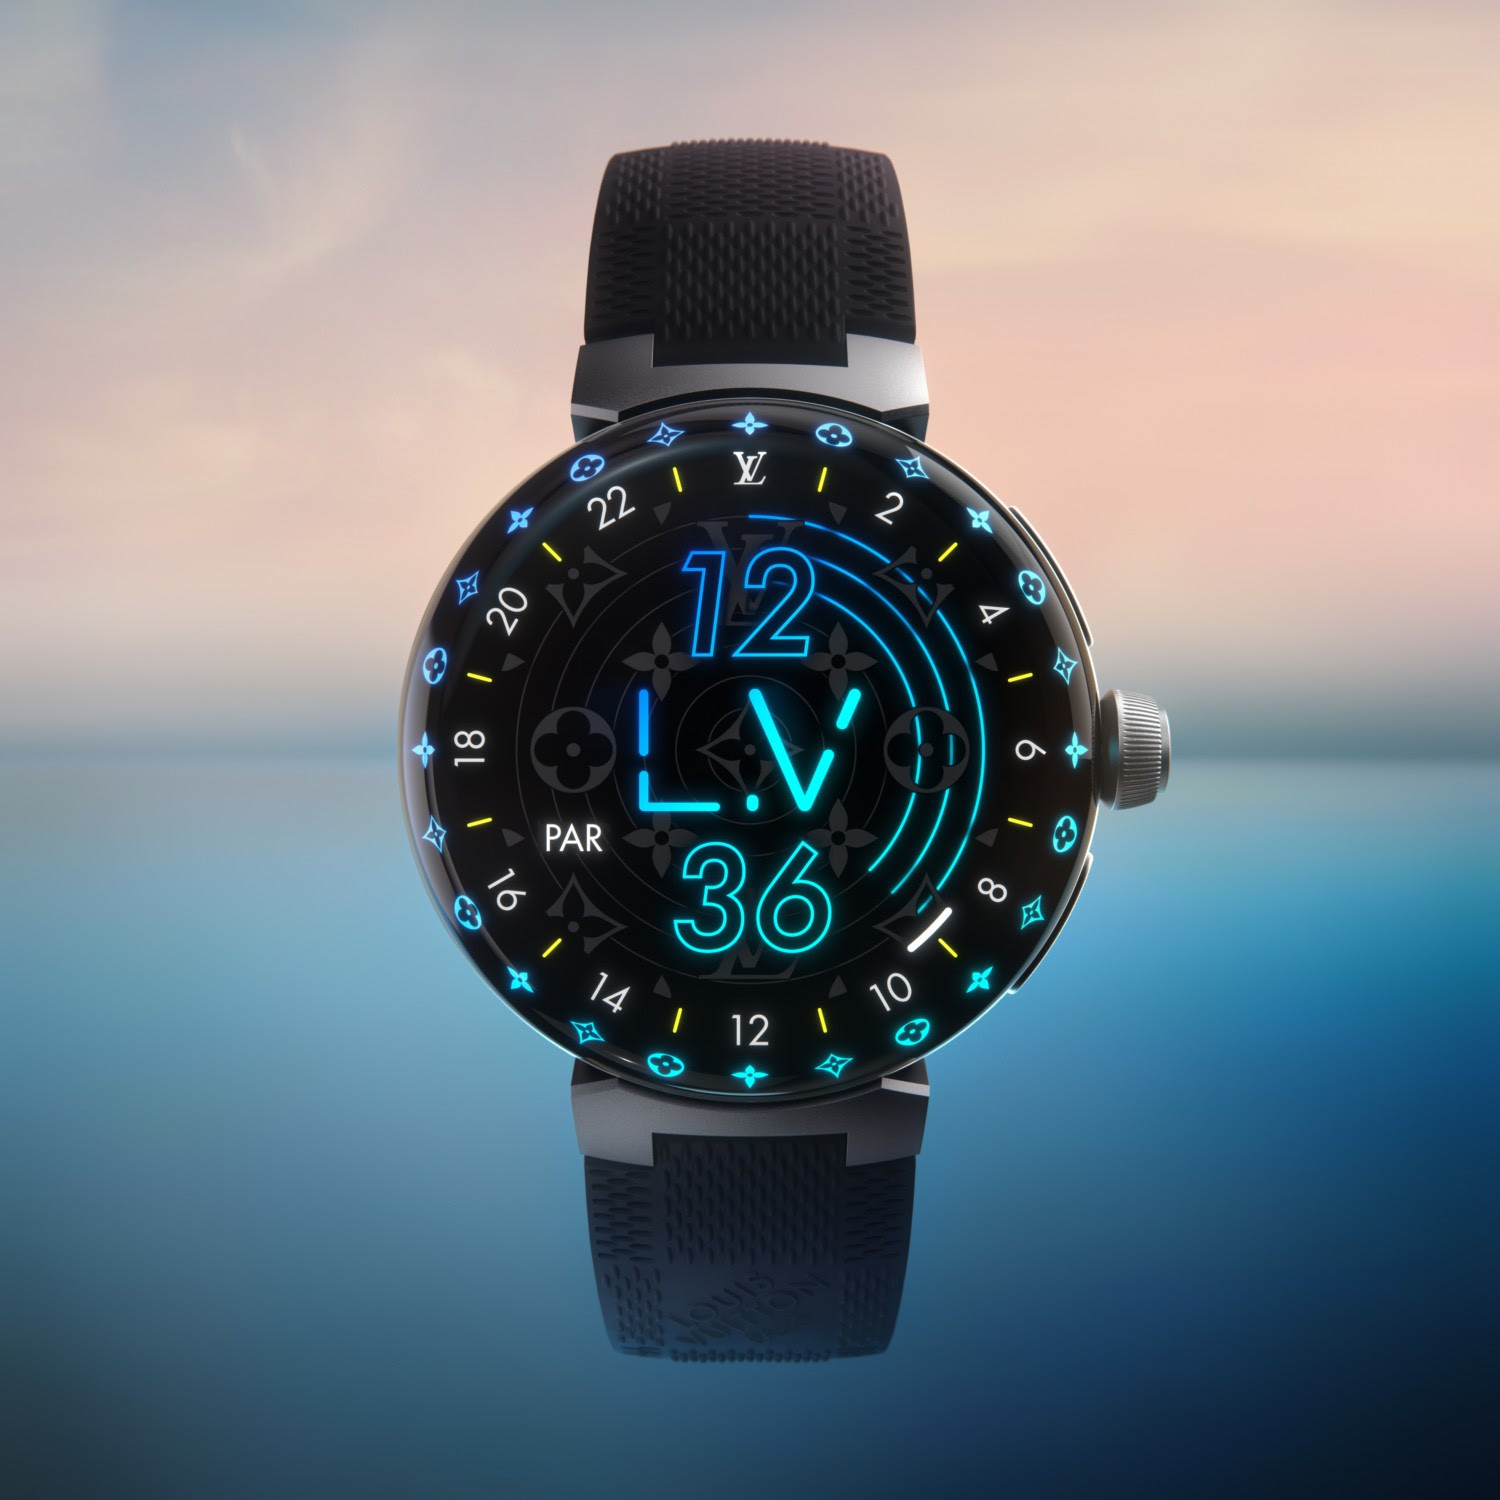 Louis Vuitton's new Tambour watches contain an element of surprise